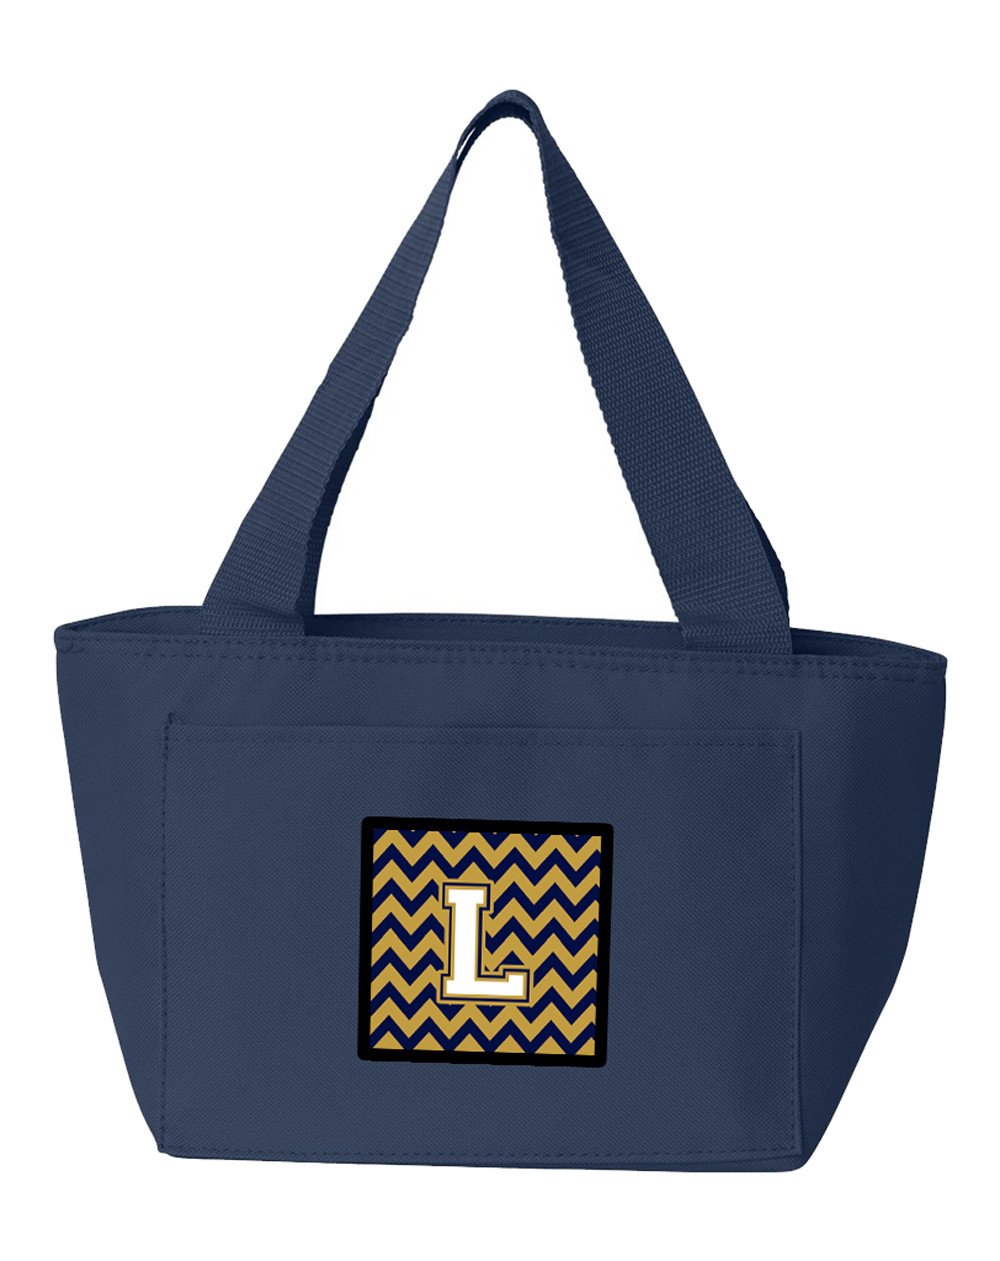 Letter L Chevron Navy Blue and Gold Lunch Bag CJ1057-LNA-8808 by Caroline's Treasures